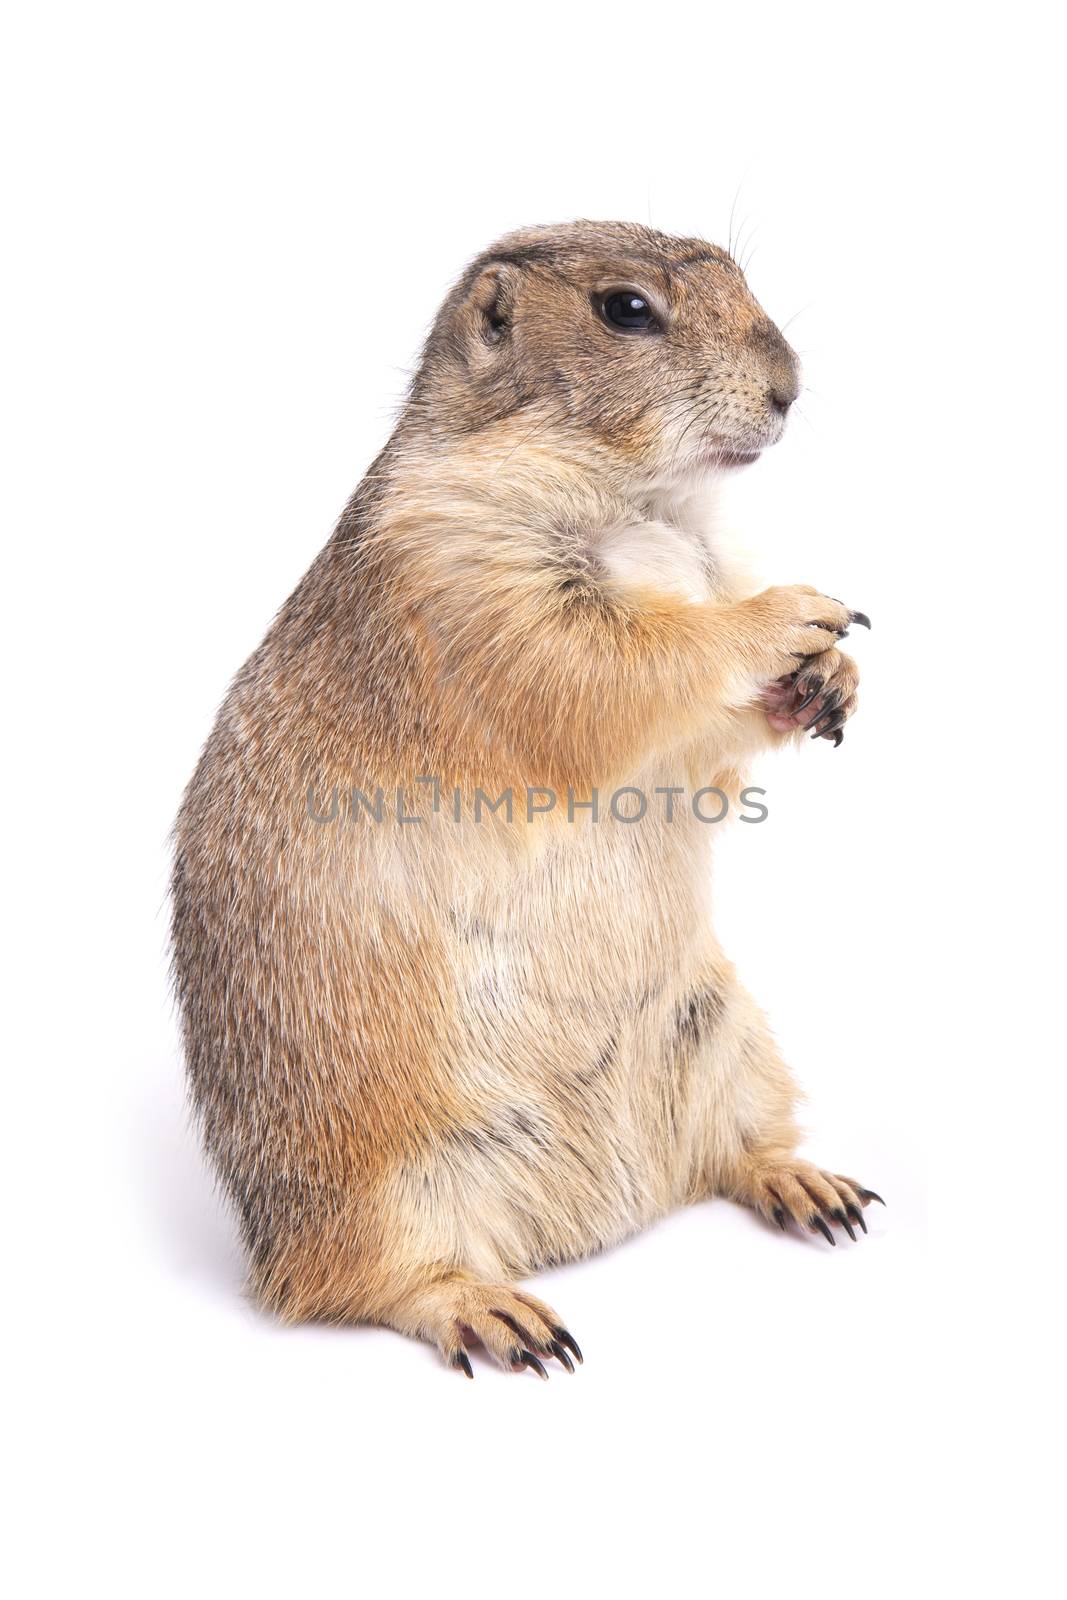 Little cute prairie dog standing on white background. by pandpstock_002